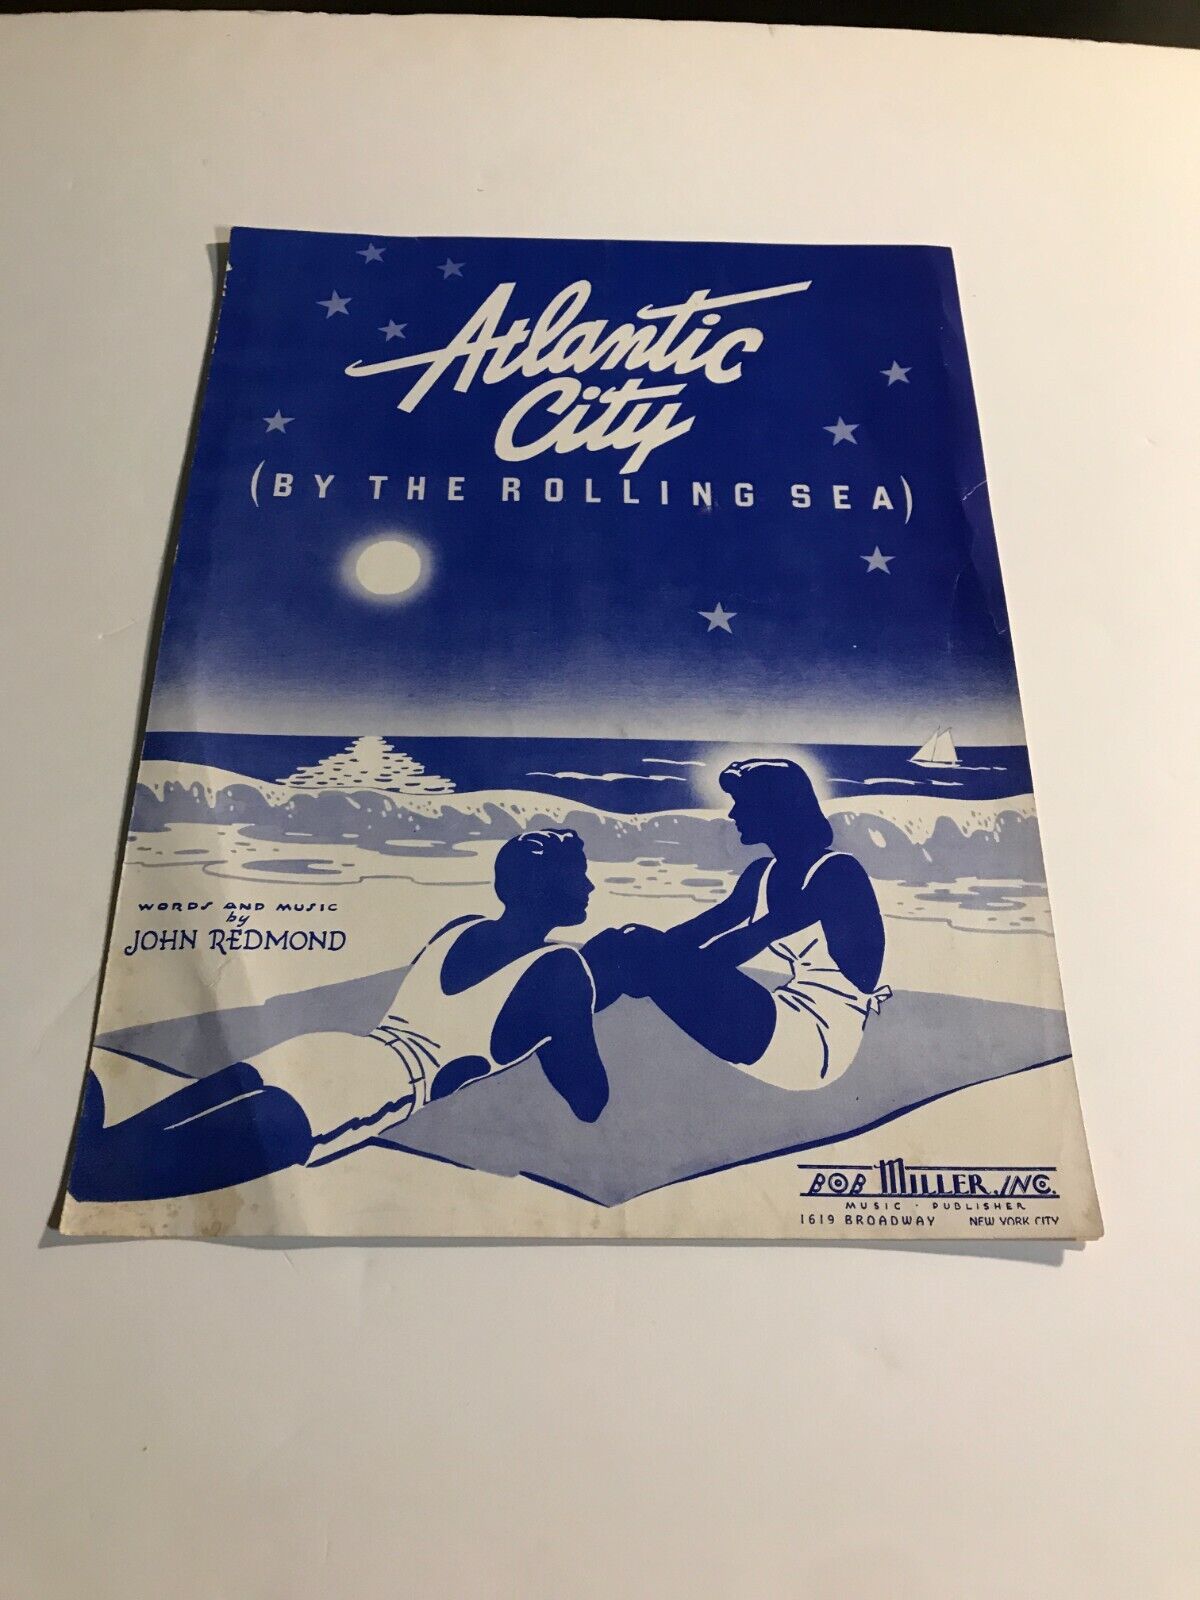 Vintage Sheet Music Atlantic City (By The Rolling Sea)